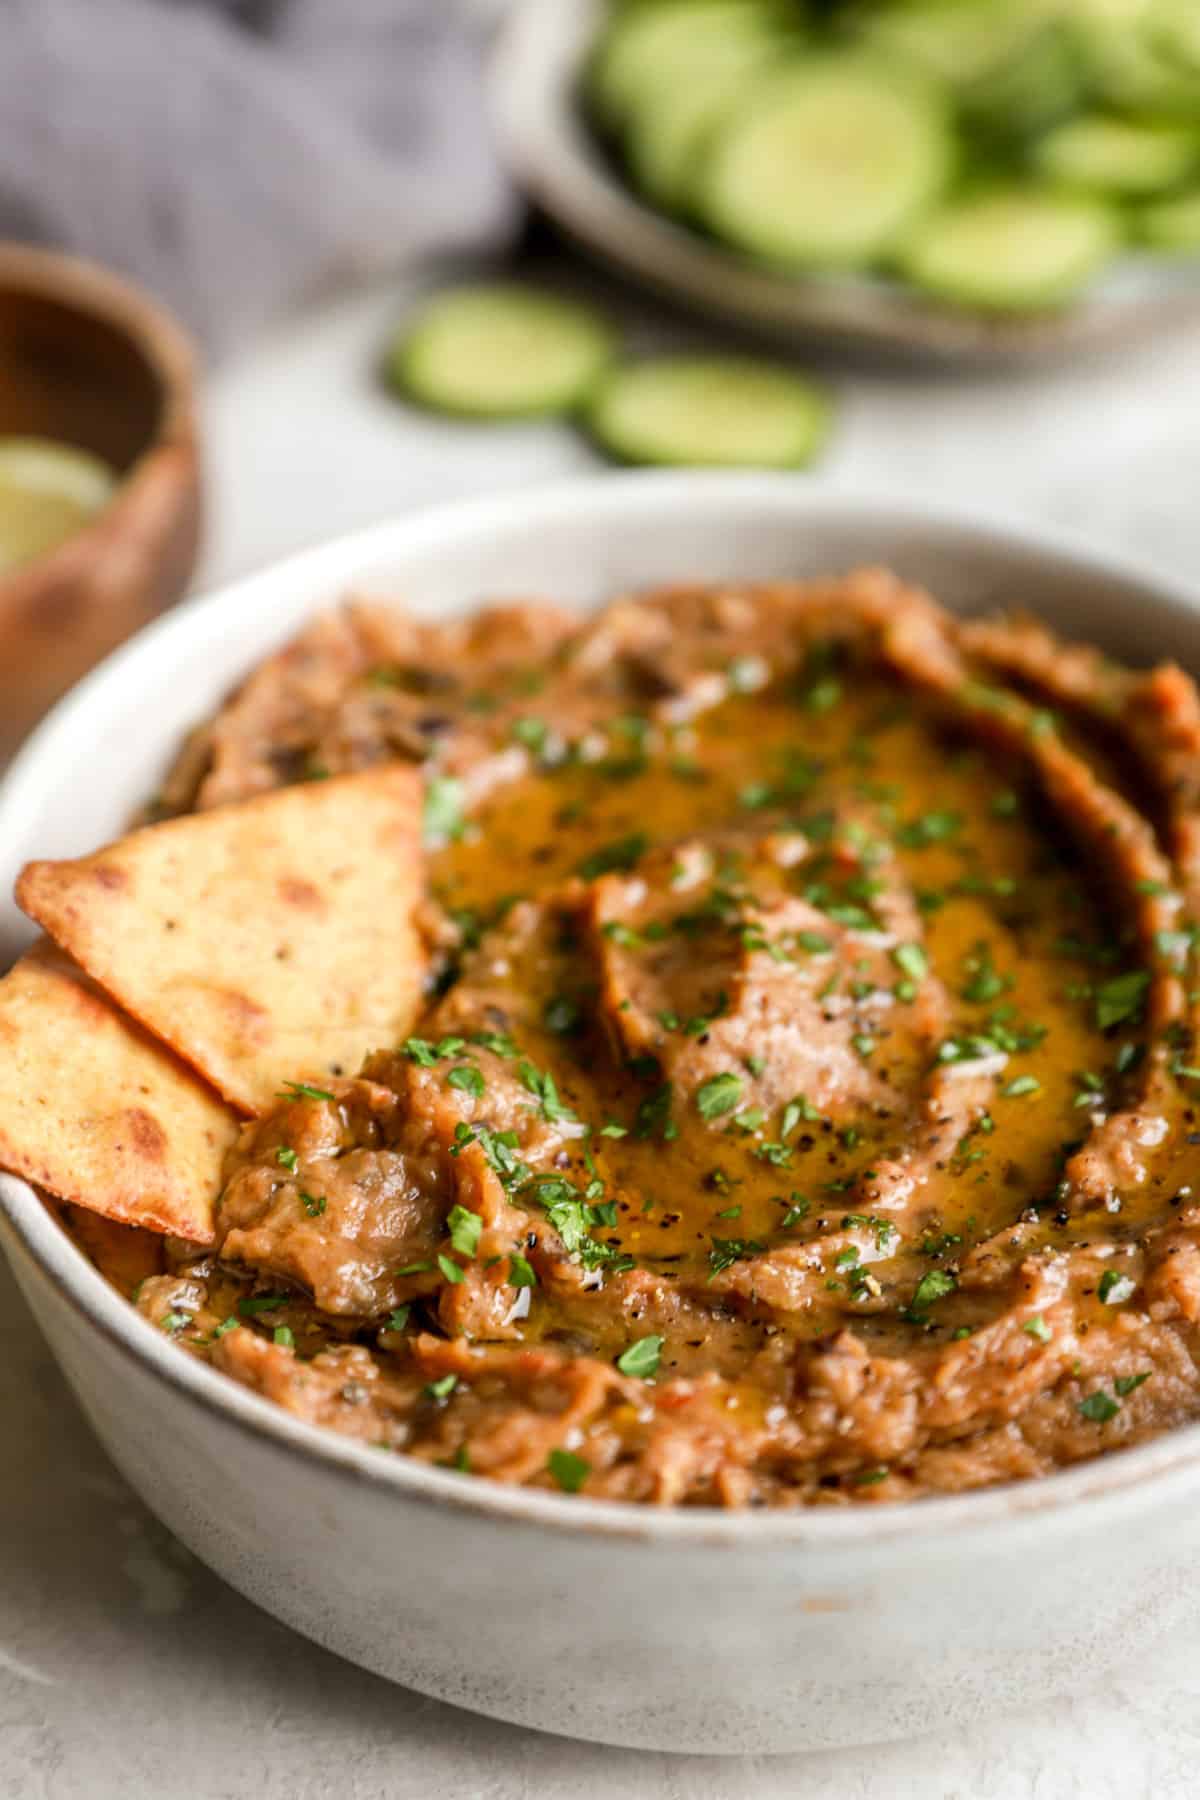 Side view of a bowl of grilled eggplant dip and two crackers.